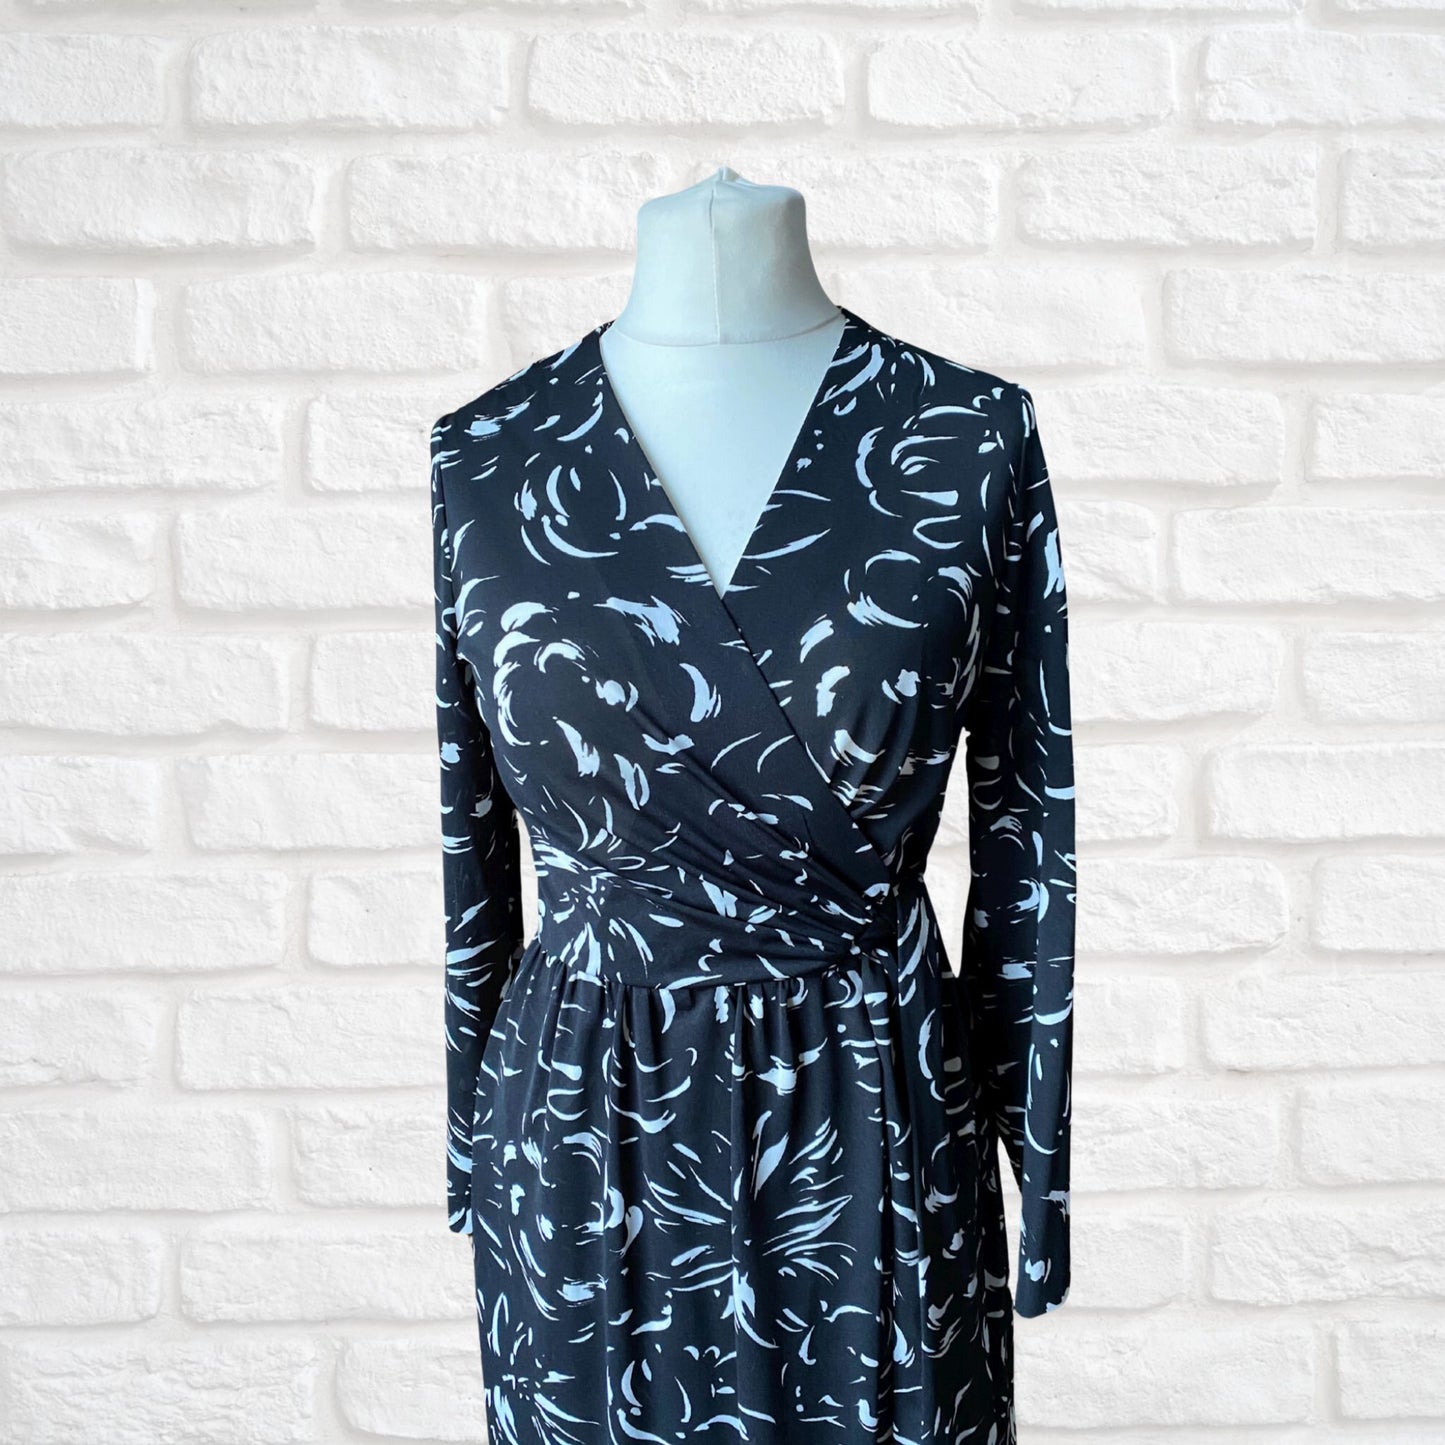 70s Vintage  Black and White Abstract Print Faux Wrap Maxi Dress. Approx UK size 10